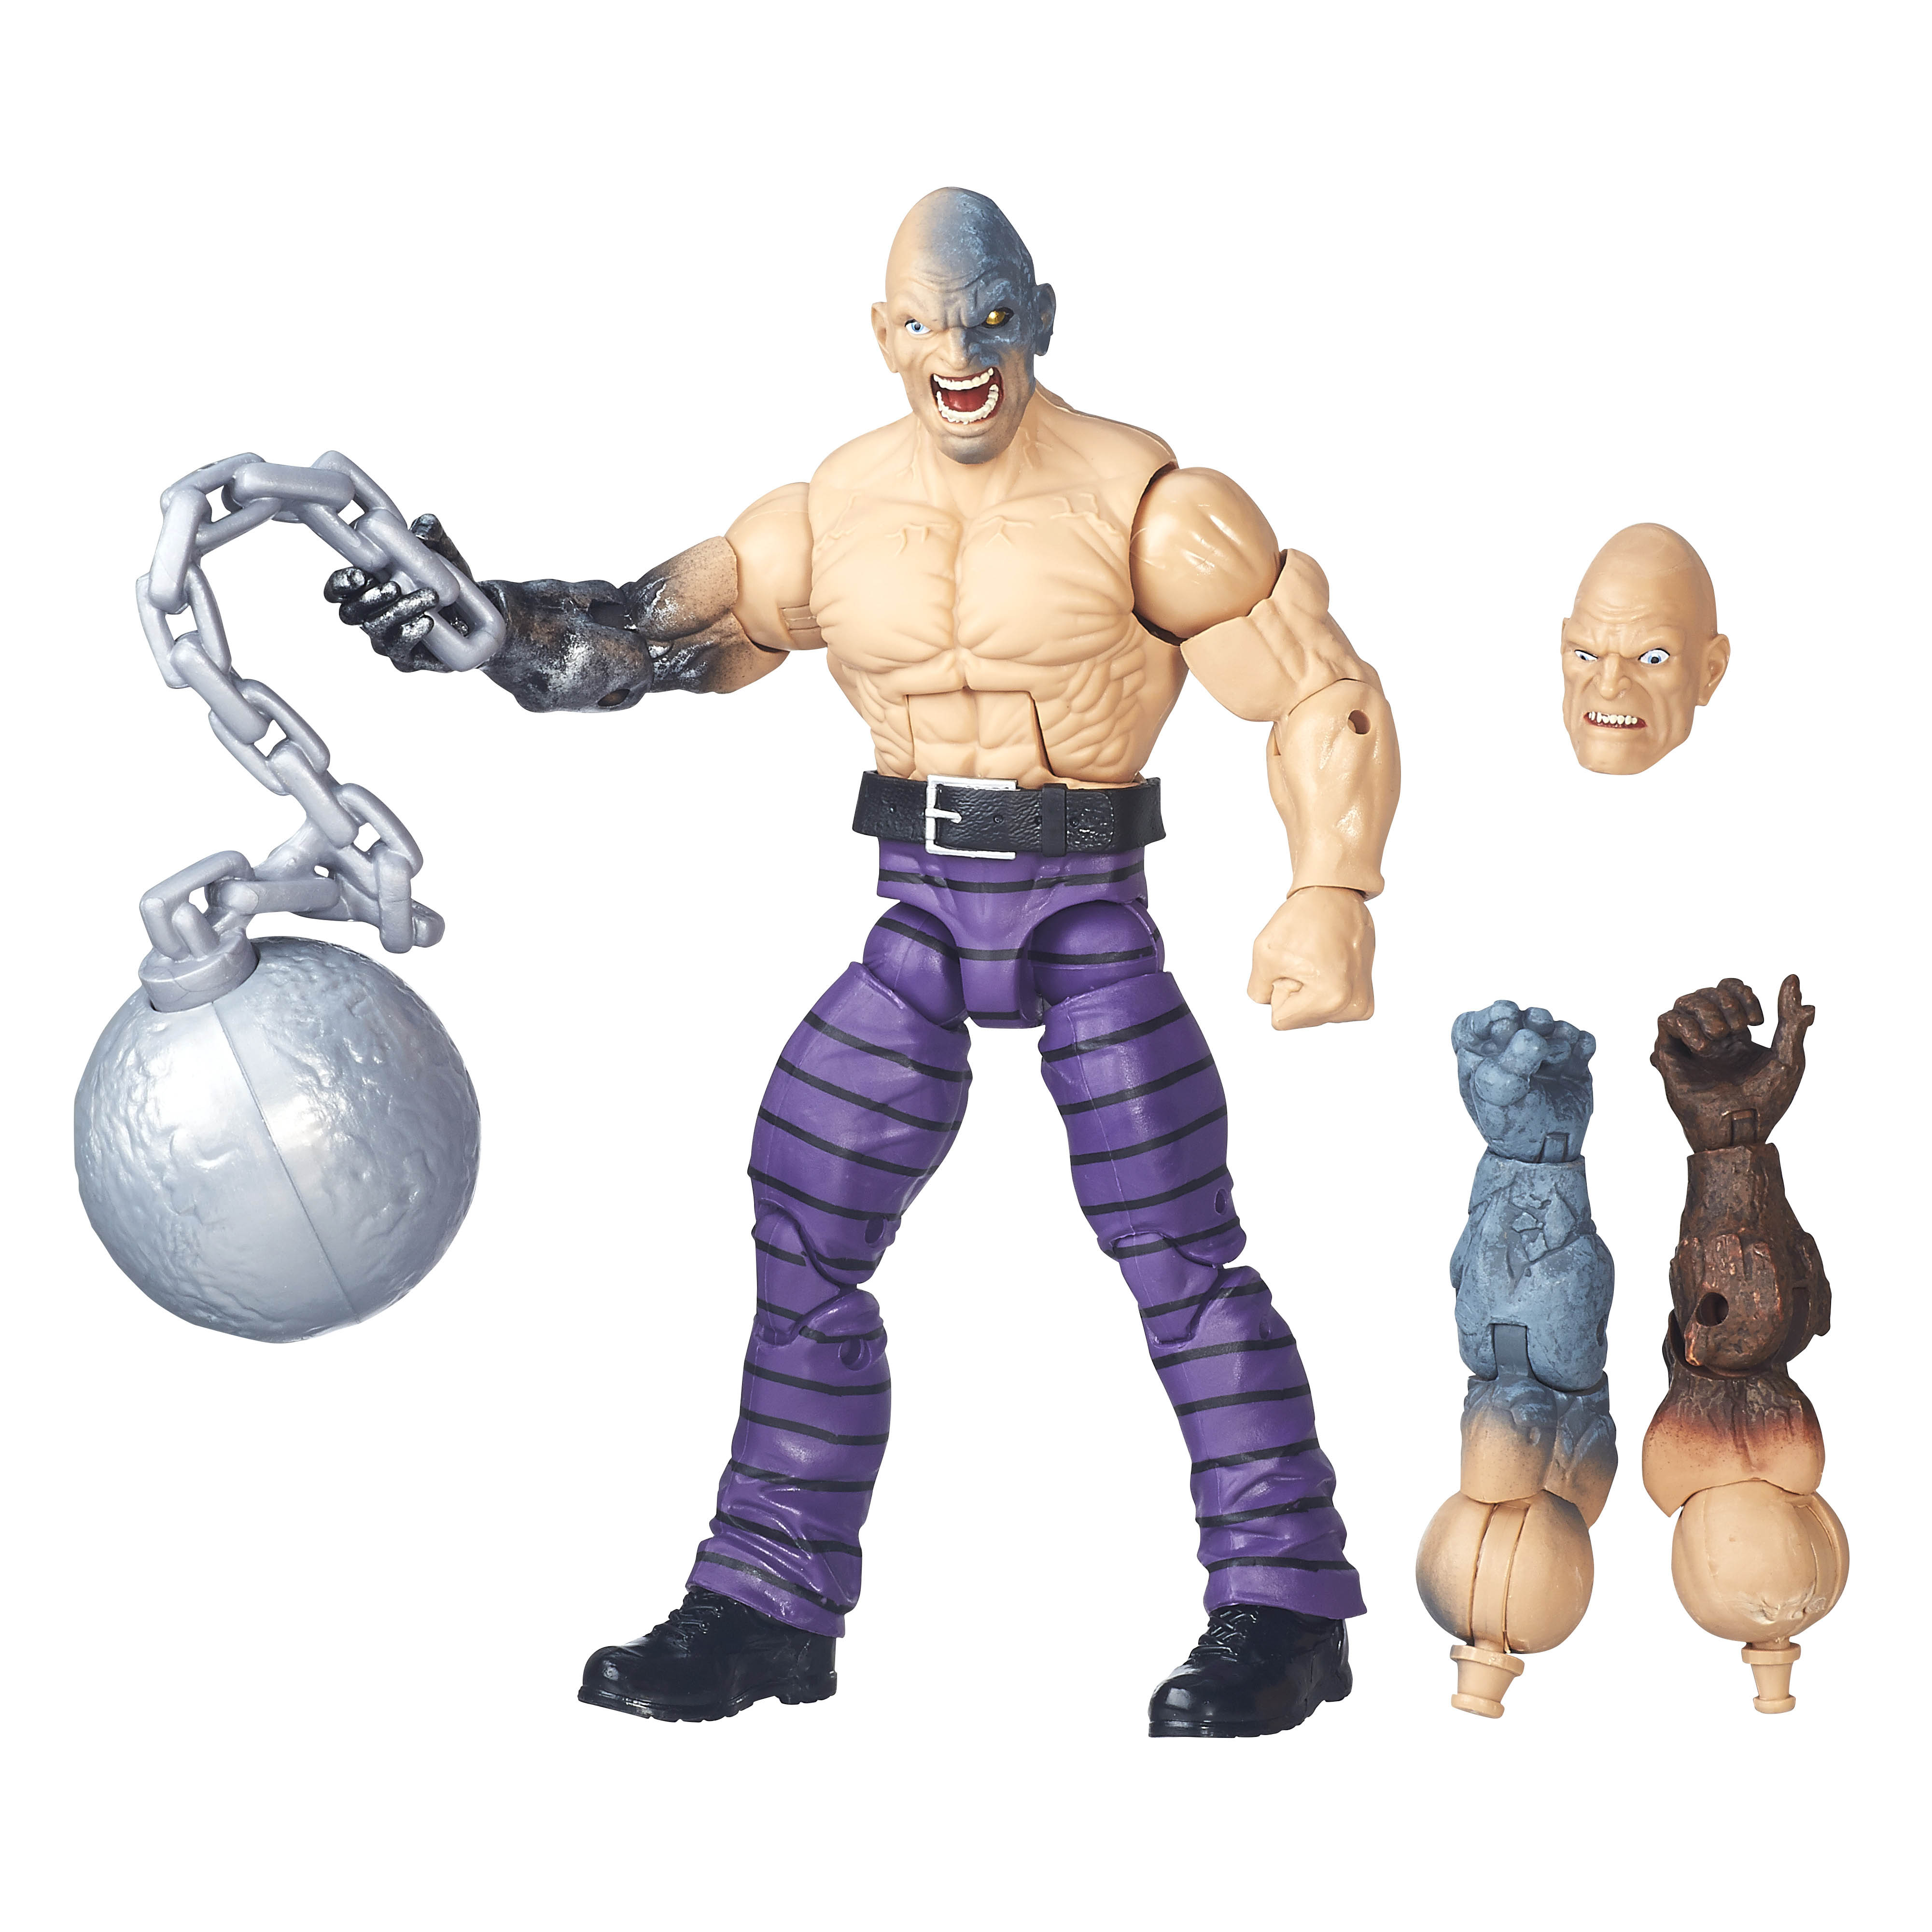 Absorbing Man High Quality Background on Wallpapers Vista